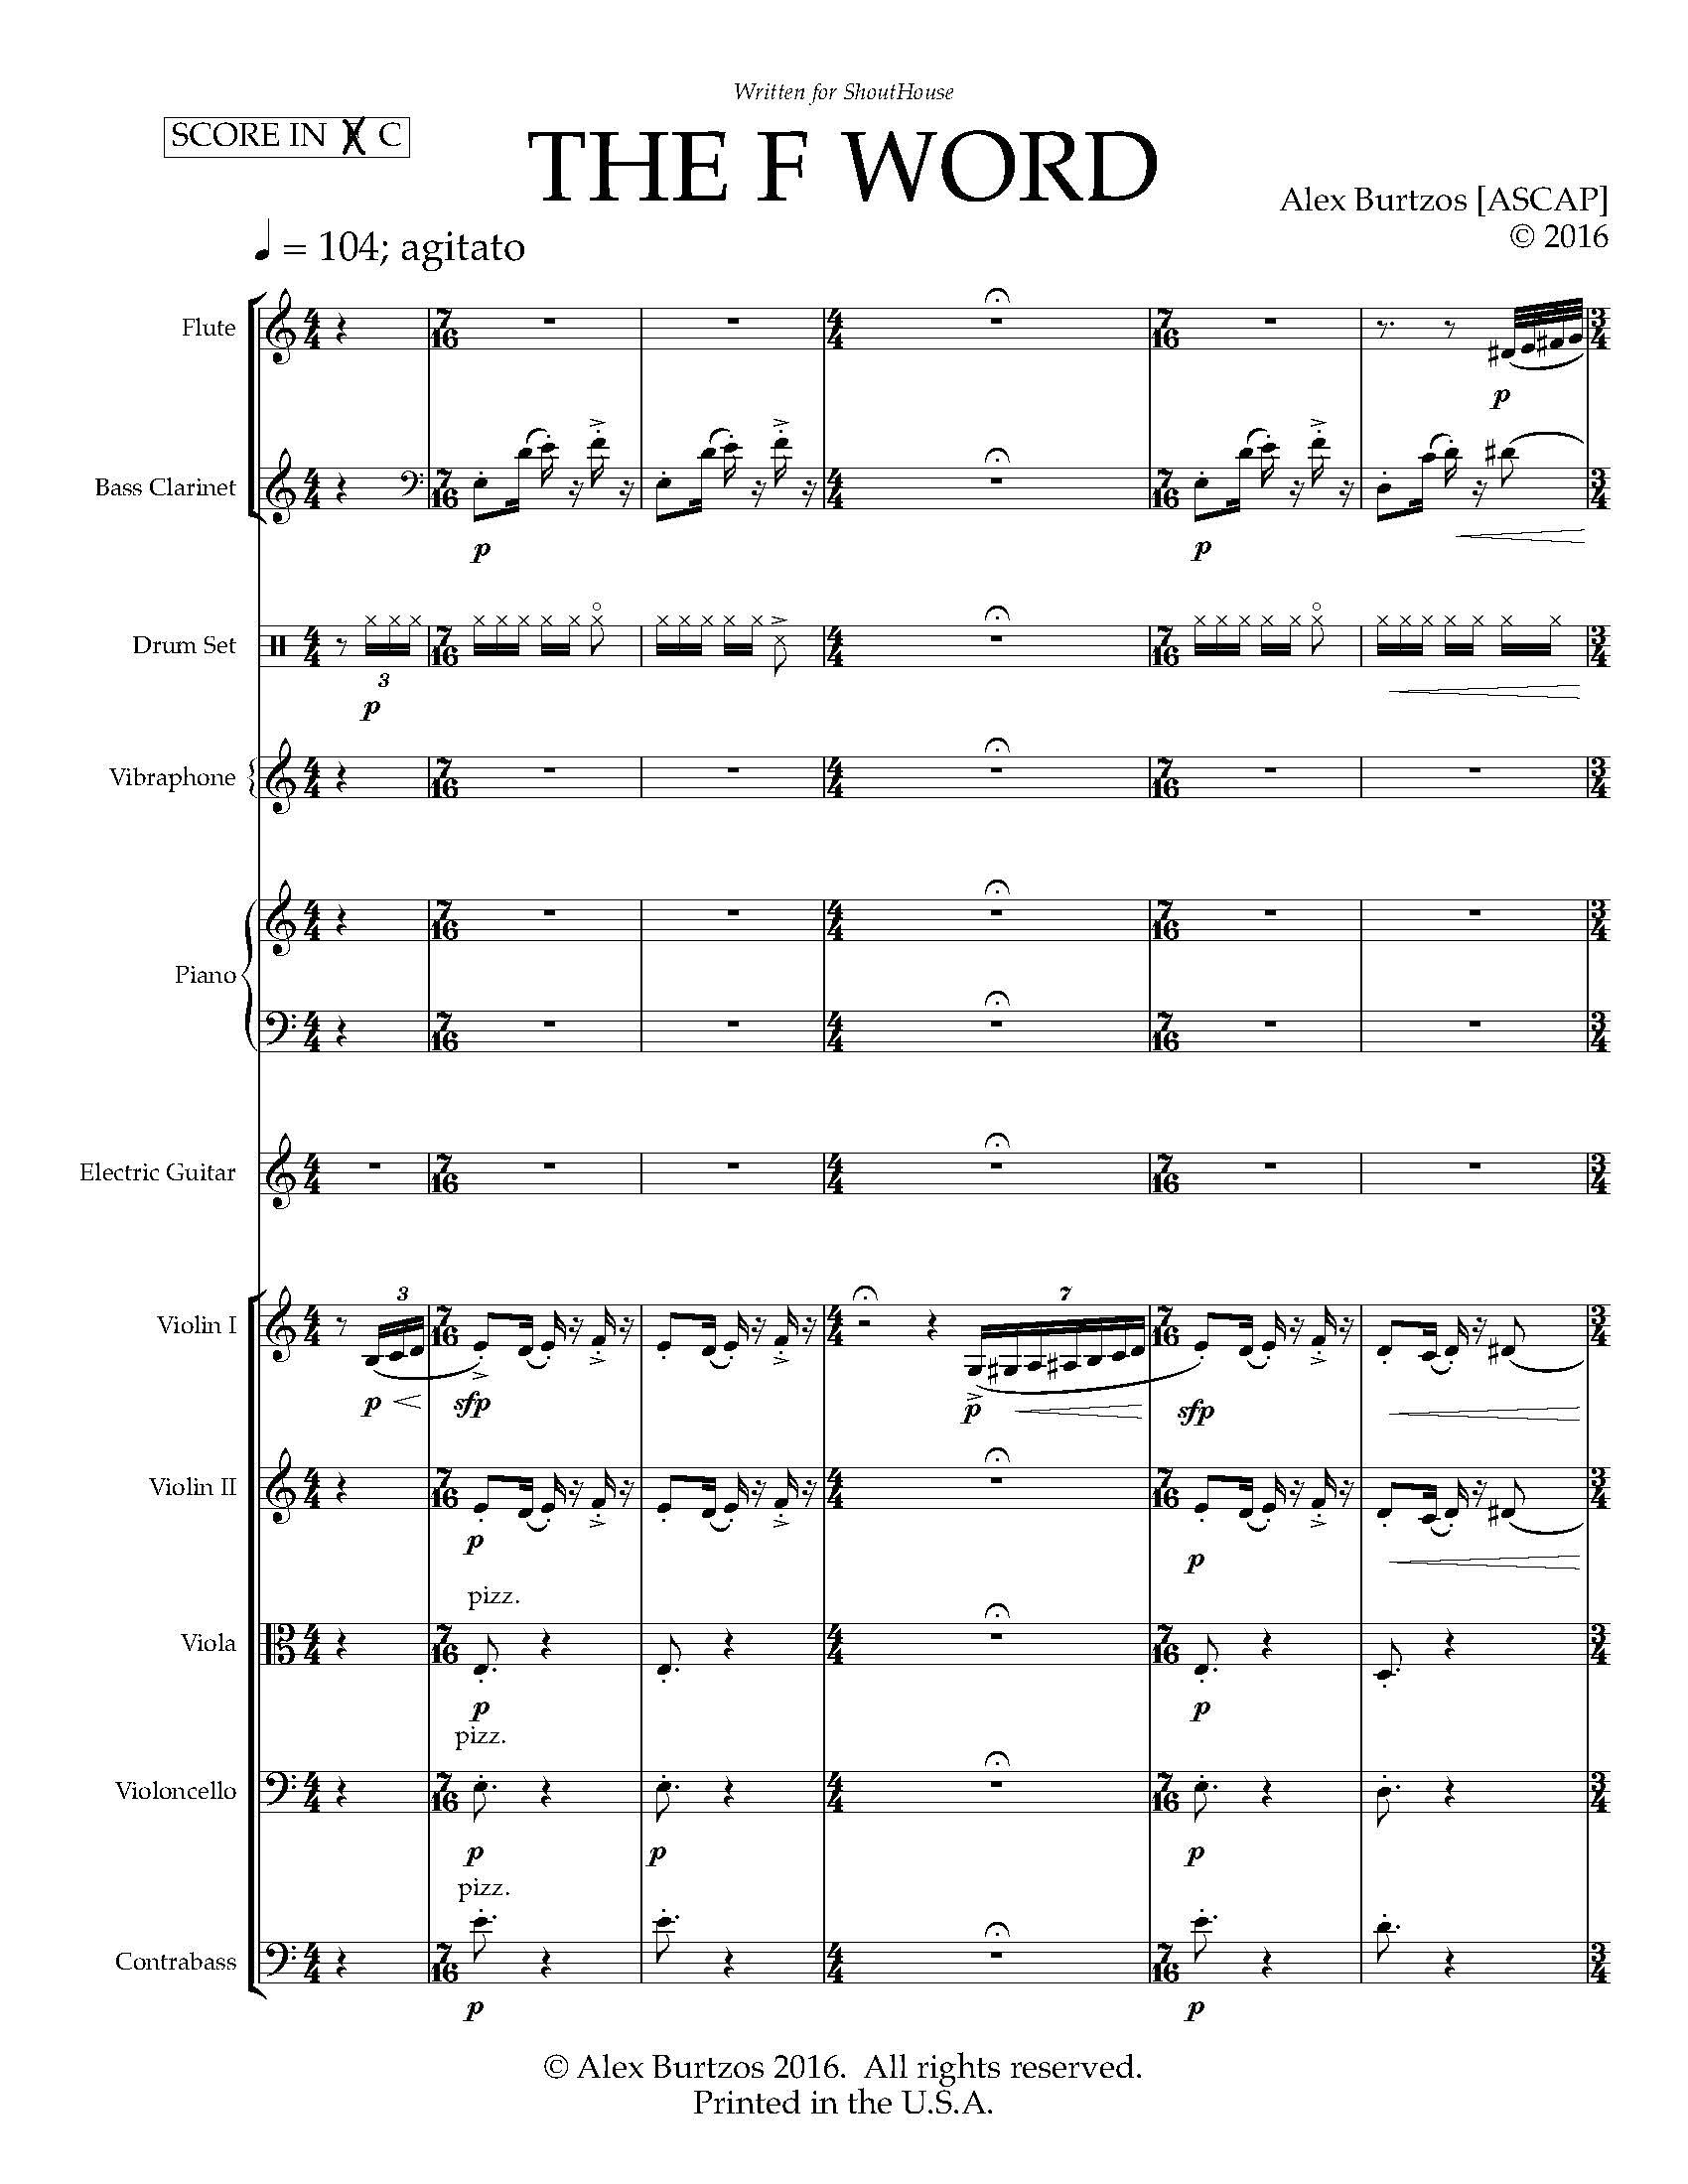 The F Word - Complete Score_Page_09.jpg